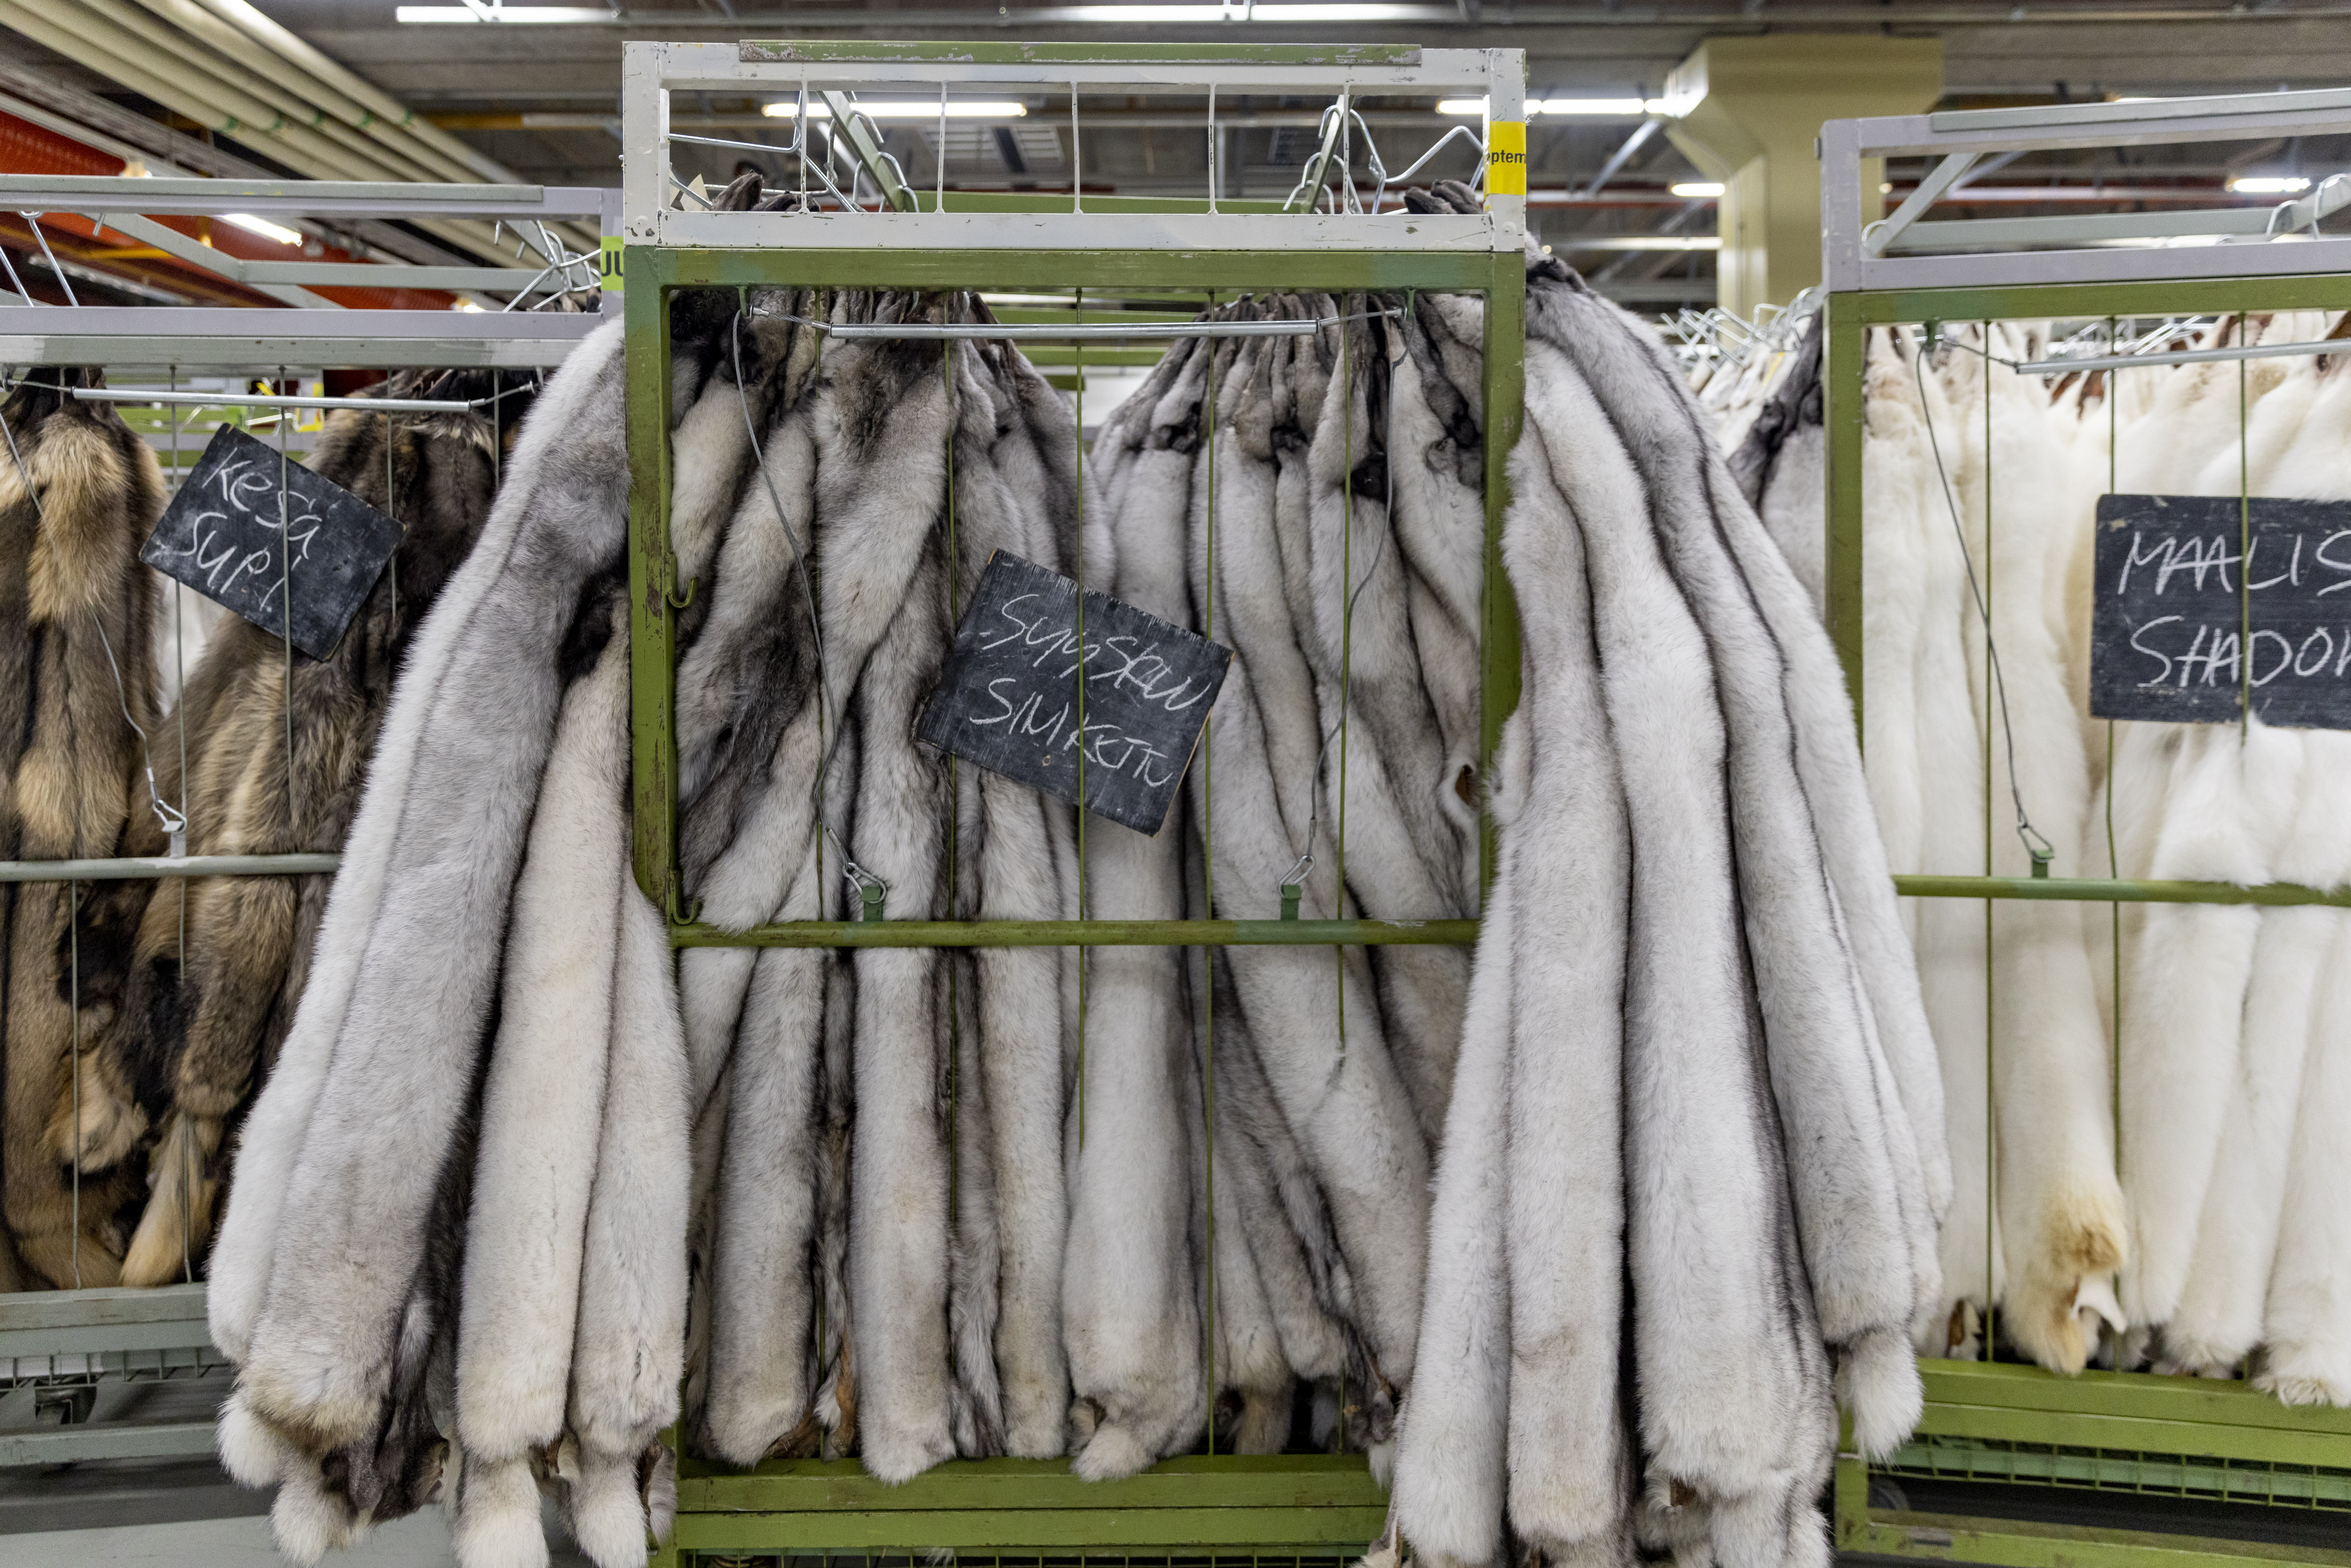 A petition calling for a ban on fur farms has gathered almost 100,000 signatures